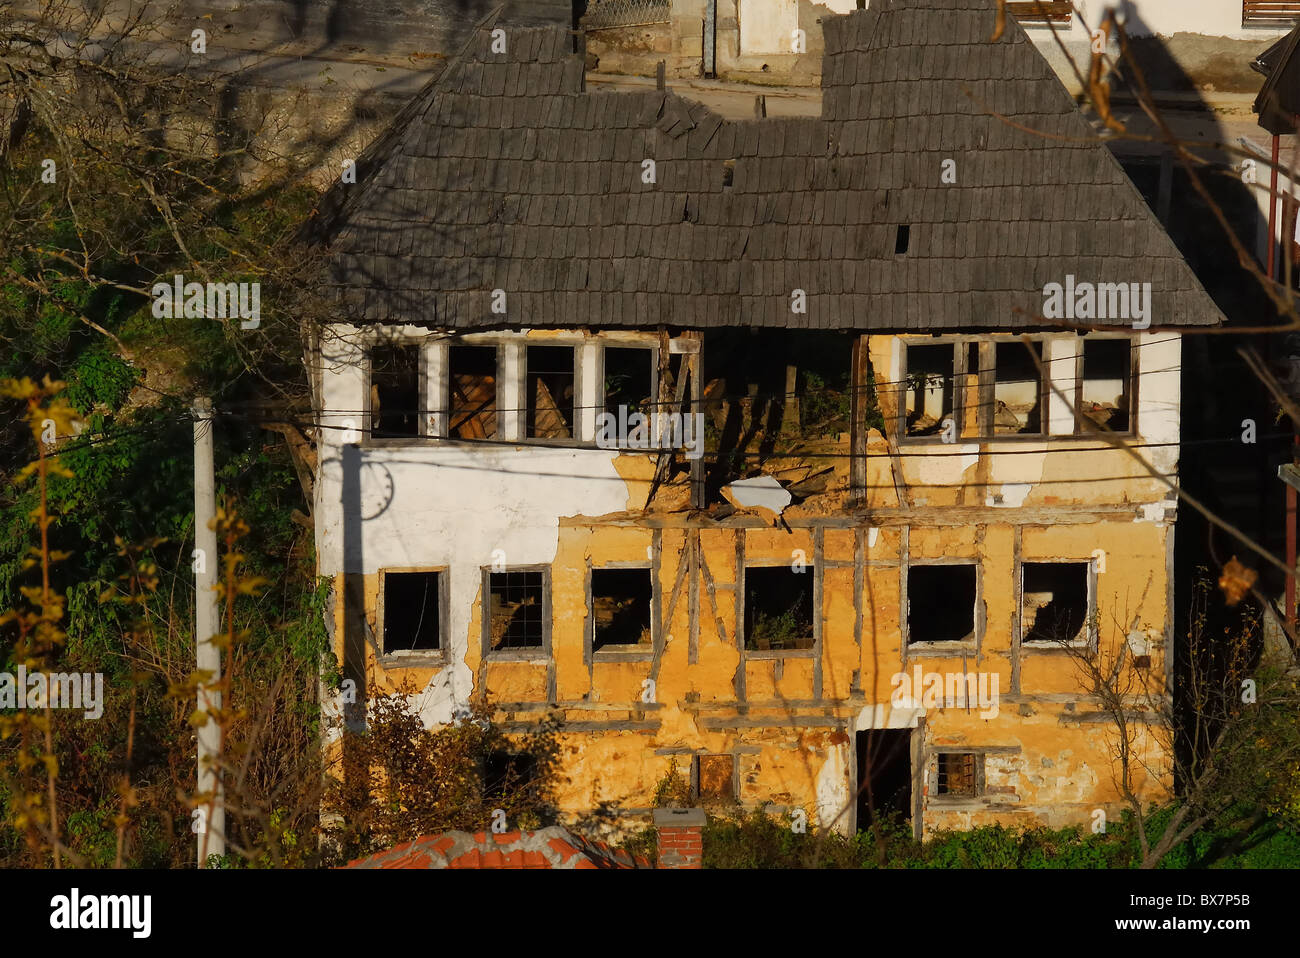 Srebrenica, Bosnia, muslim houses destroyed by the members of the Serbian paramilitary groups and the Army of Srpska Republic. Stock Photo